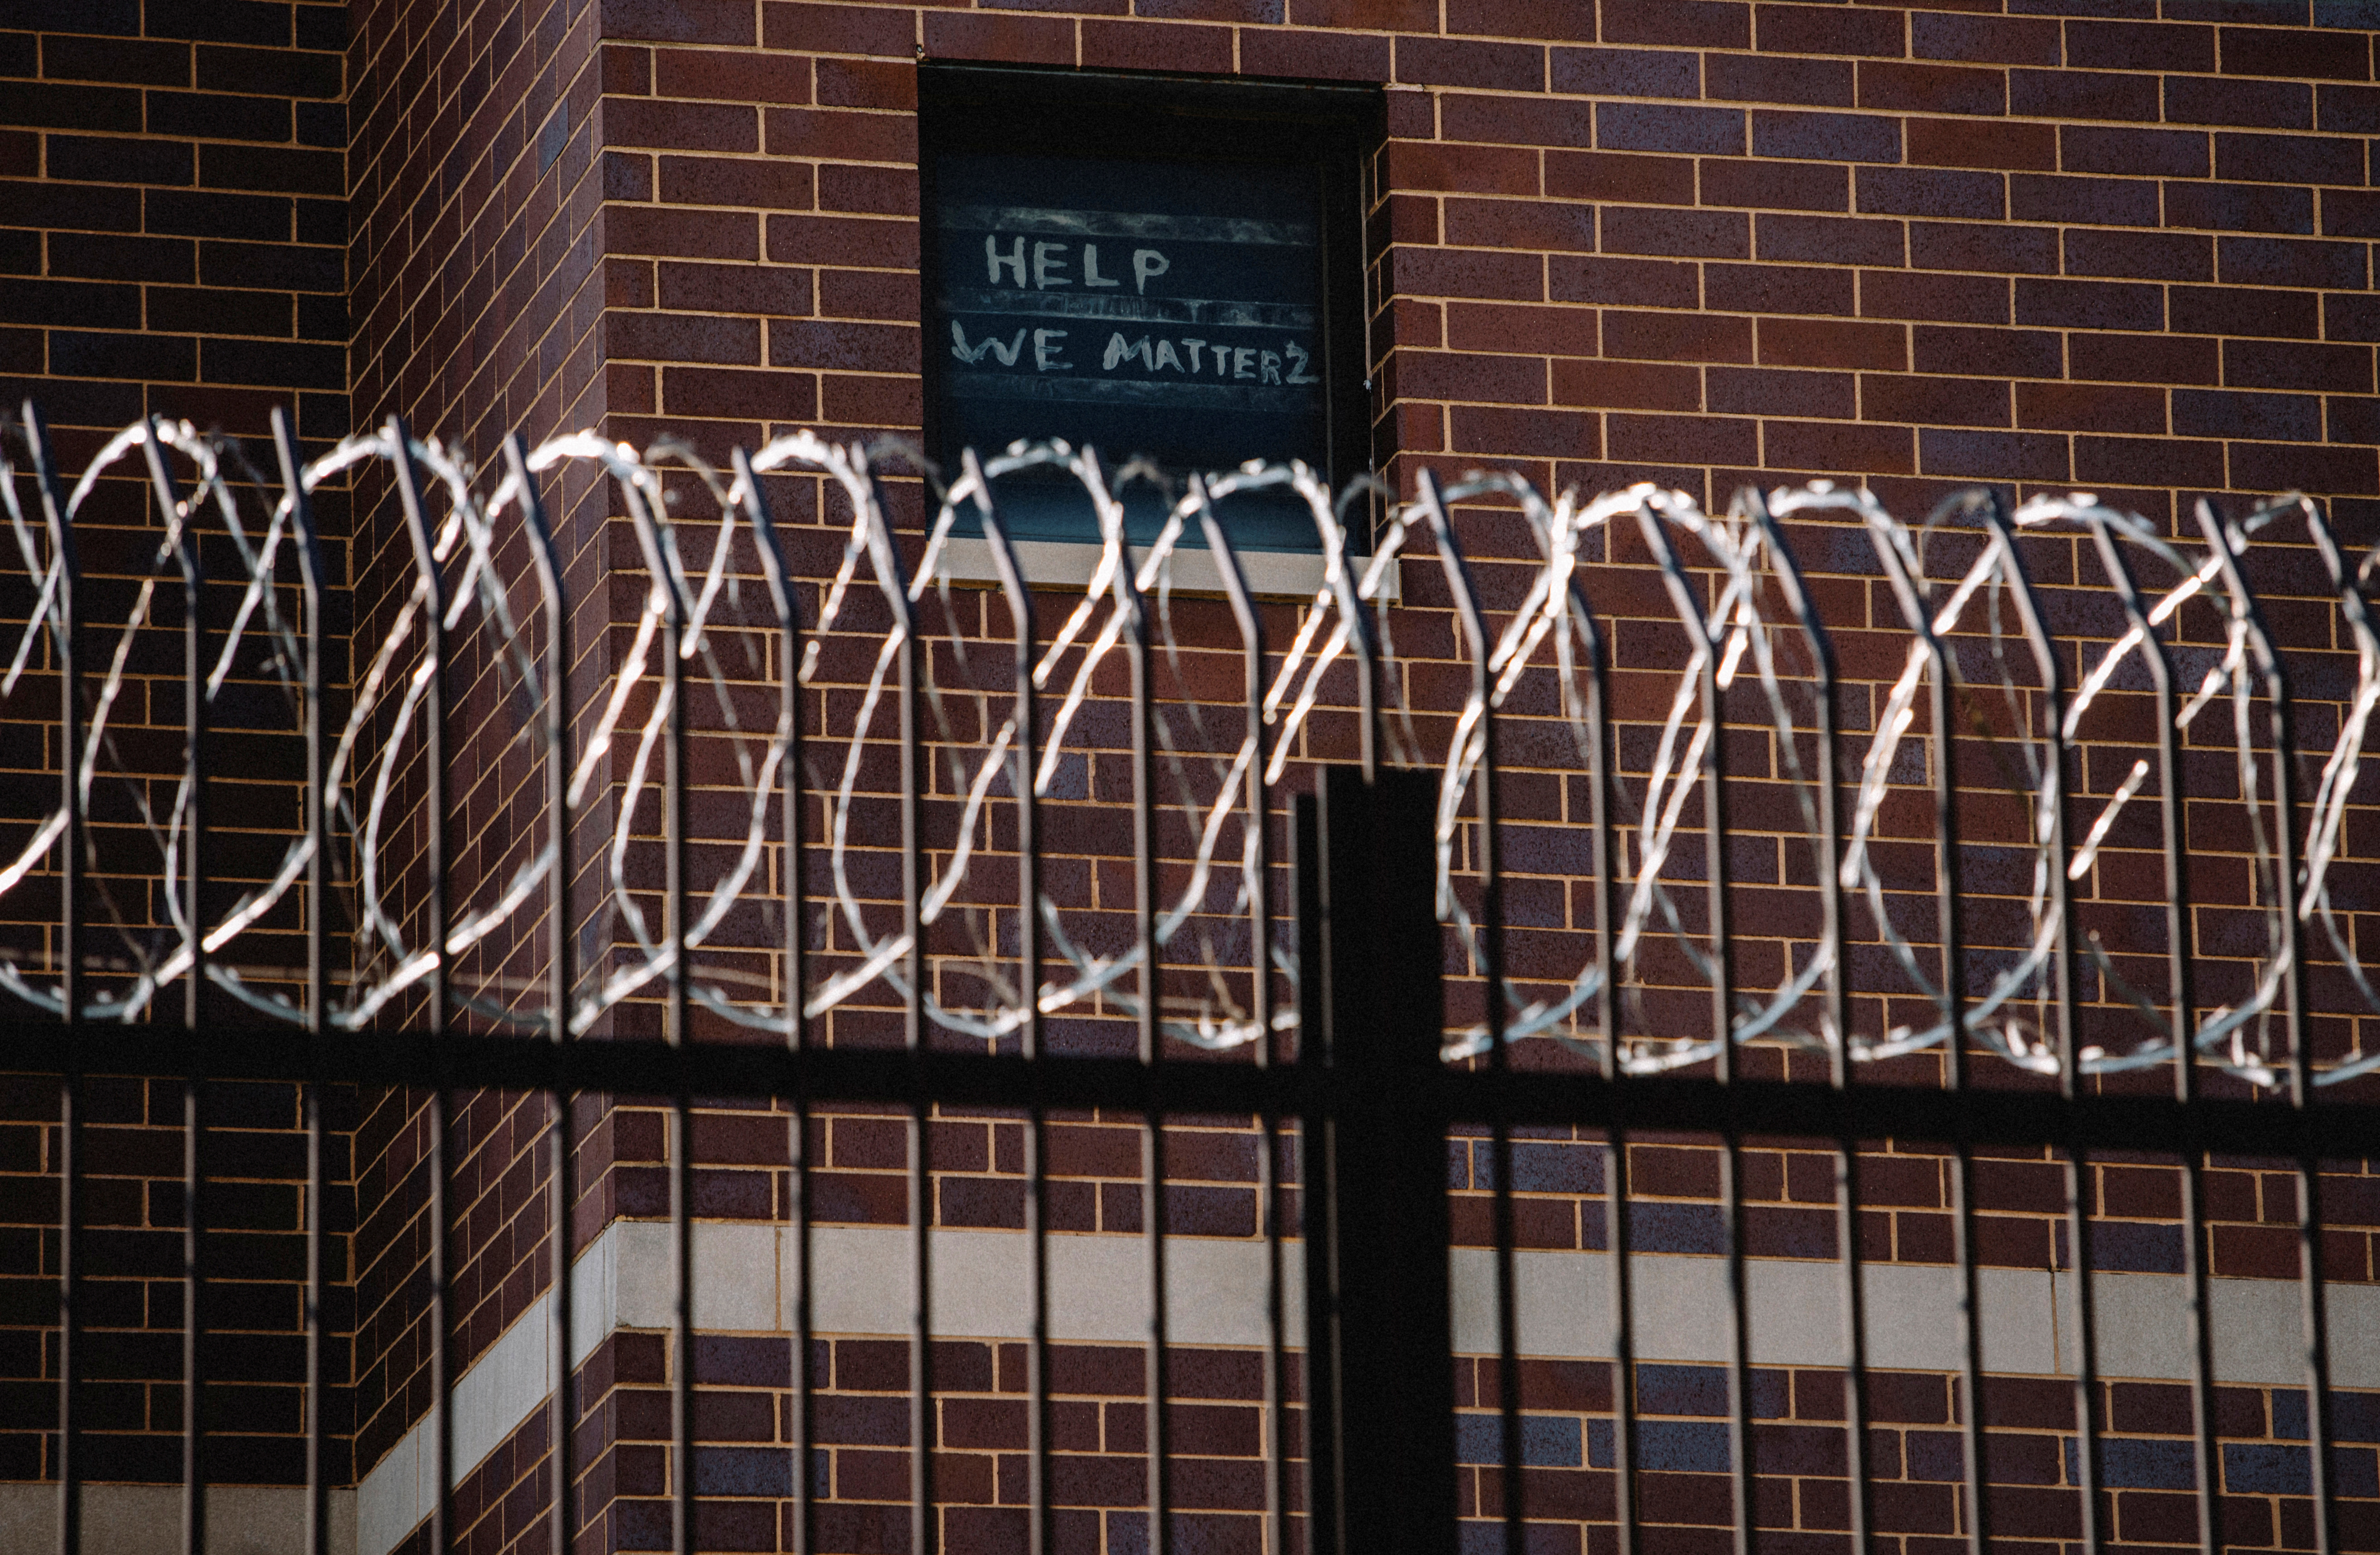 Signs made by prisoners pleading for help are seen on a window of Cook County Jail in Chicago, Illinois, U.S., April 7, 2020, amid the coronavirus disease outbreak.